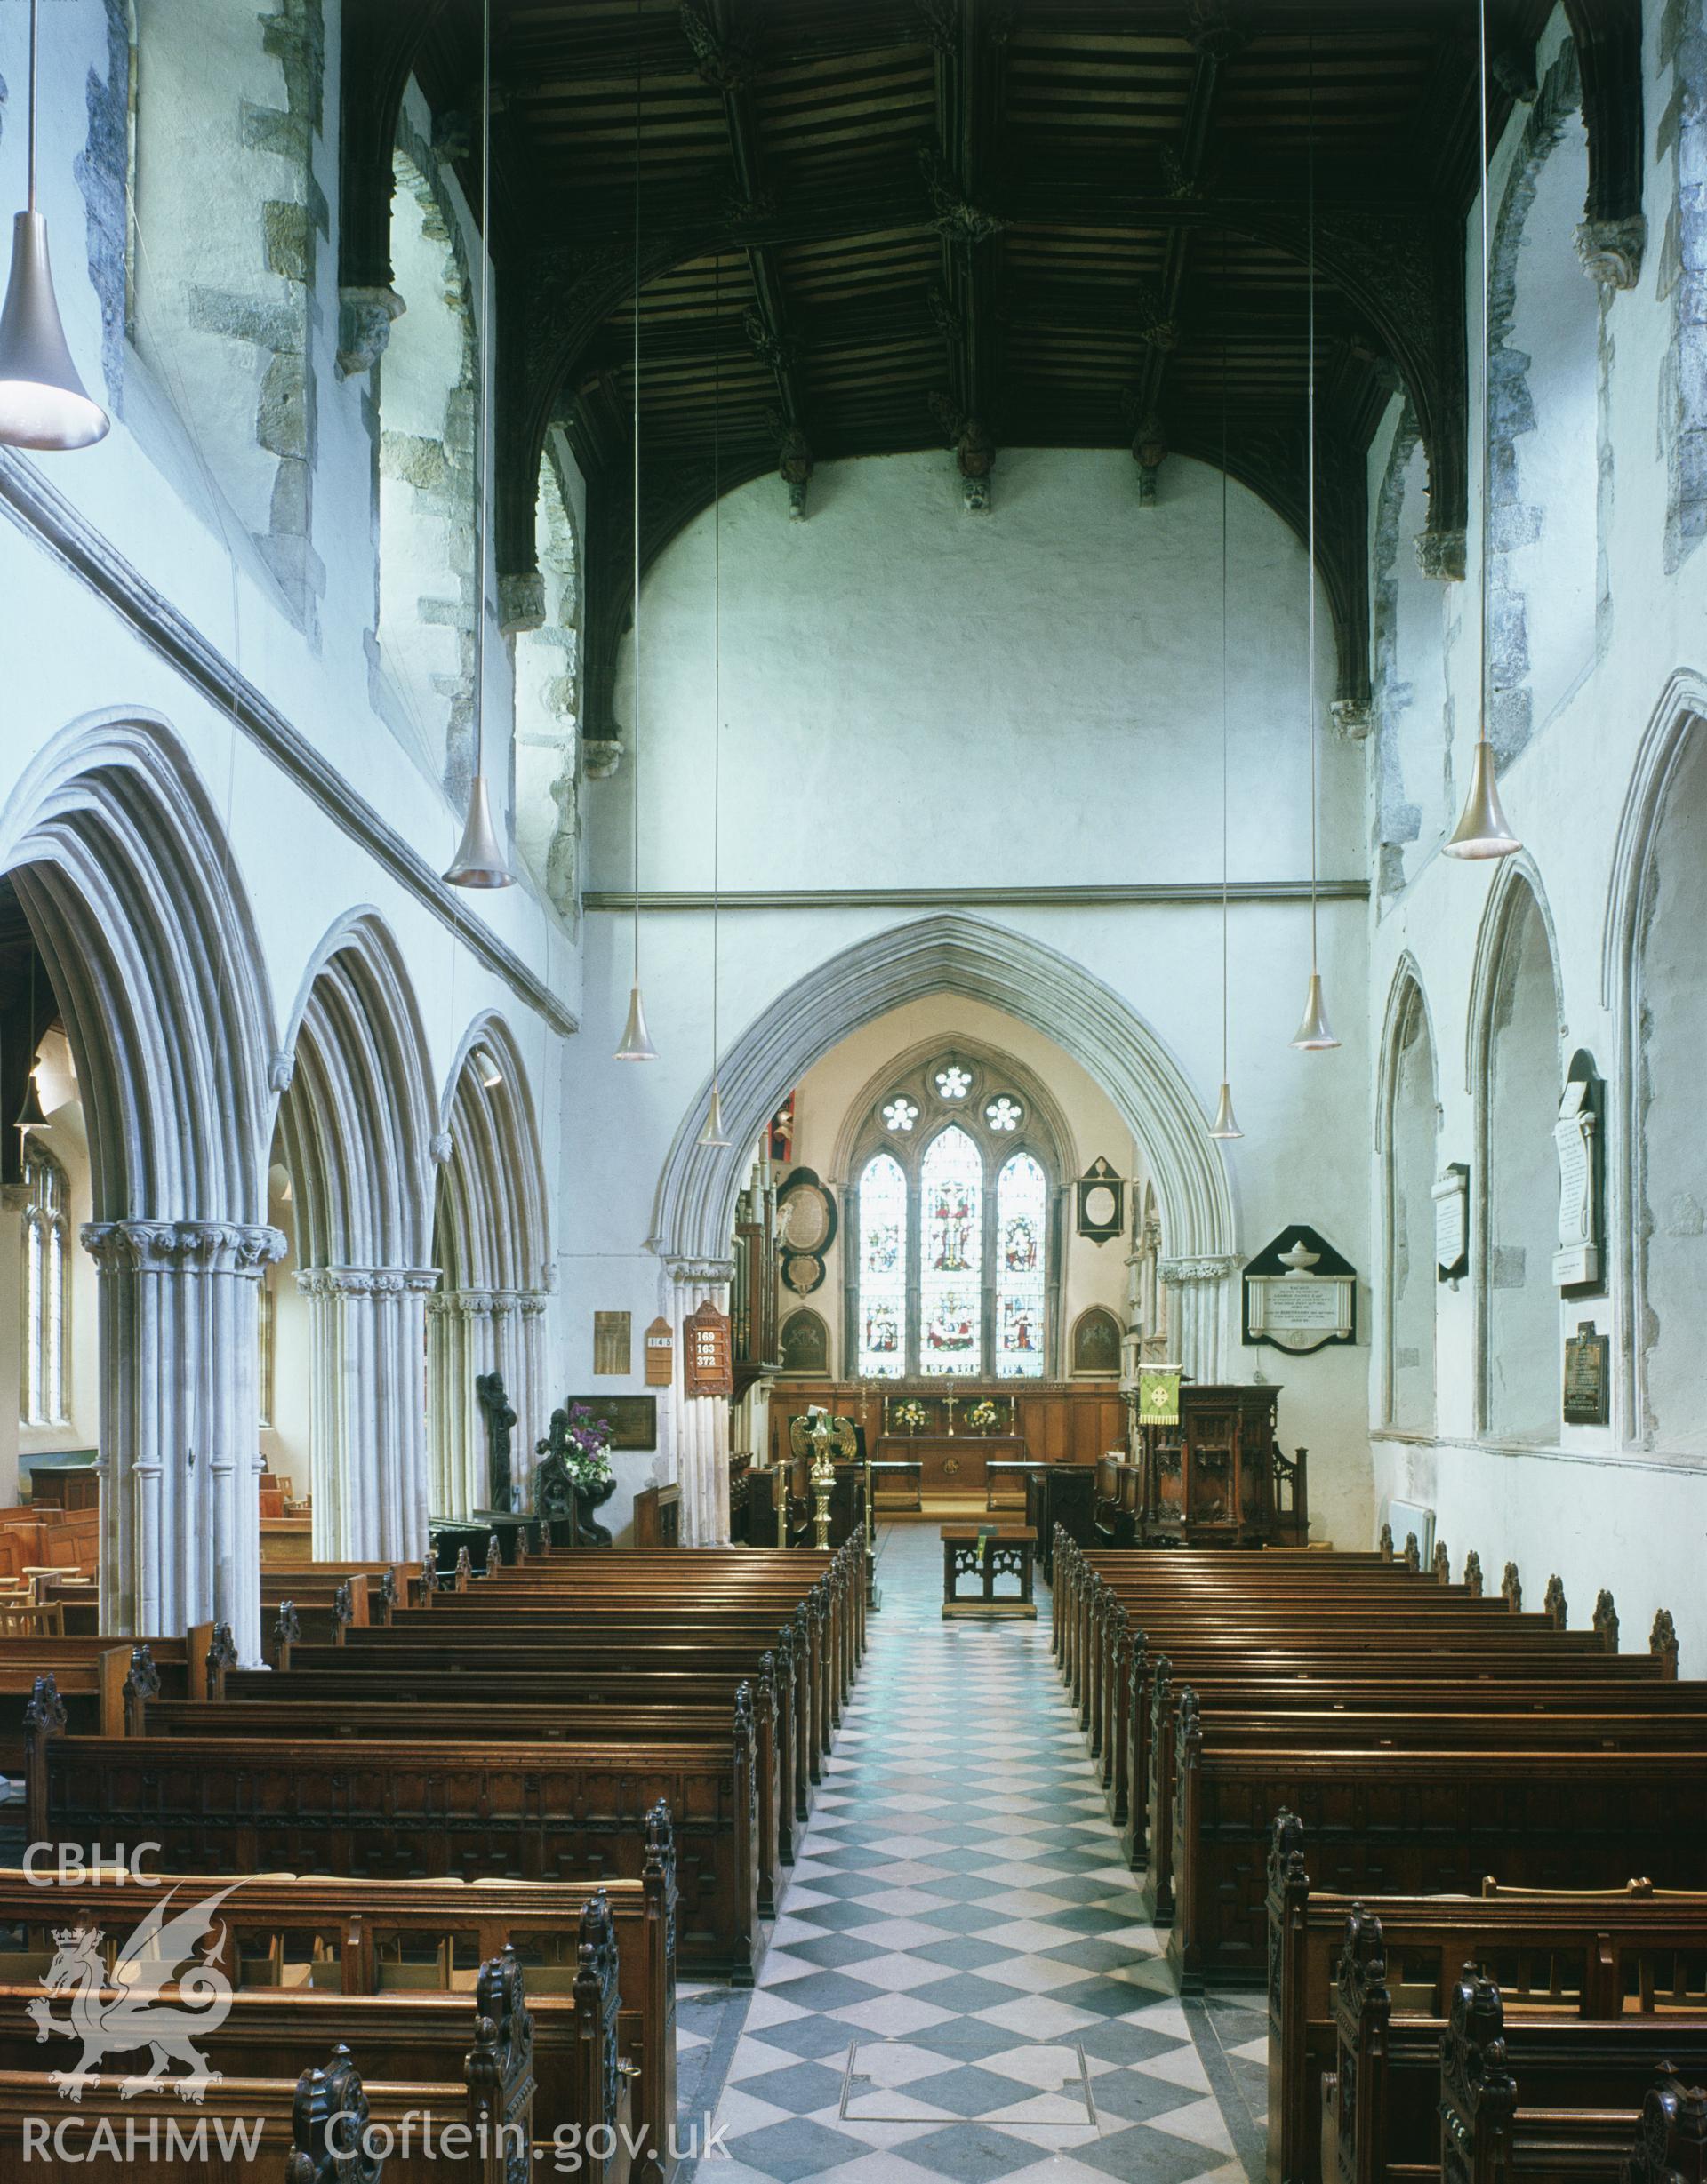 RCAHMW colour transparency showing interior view of St Marys Church, Haverfordwest